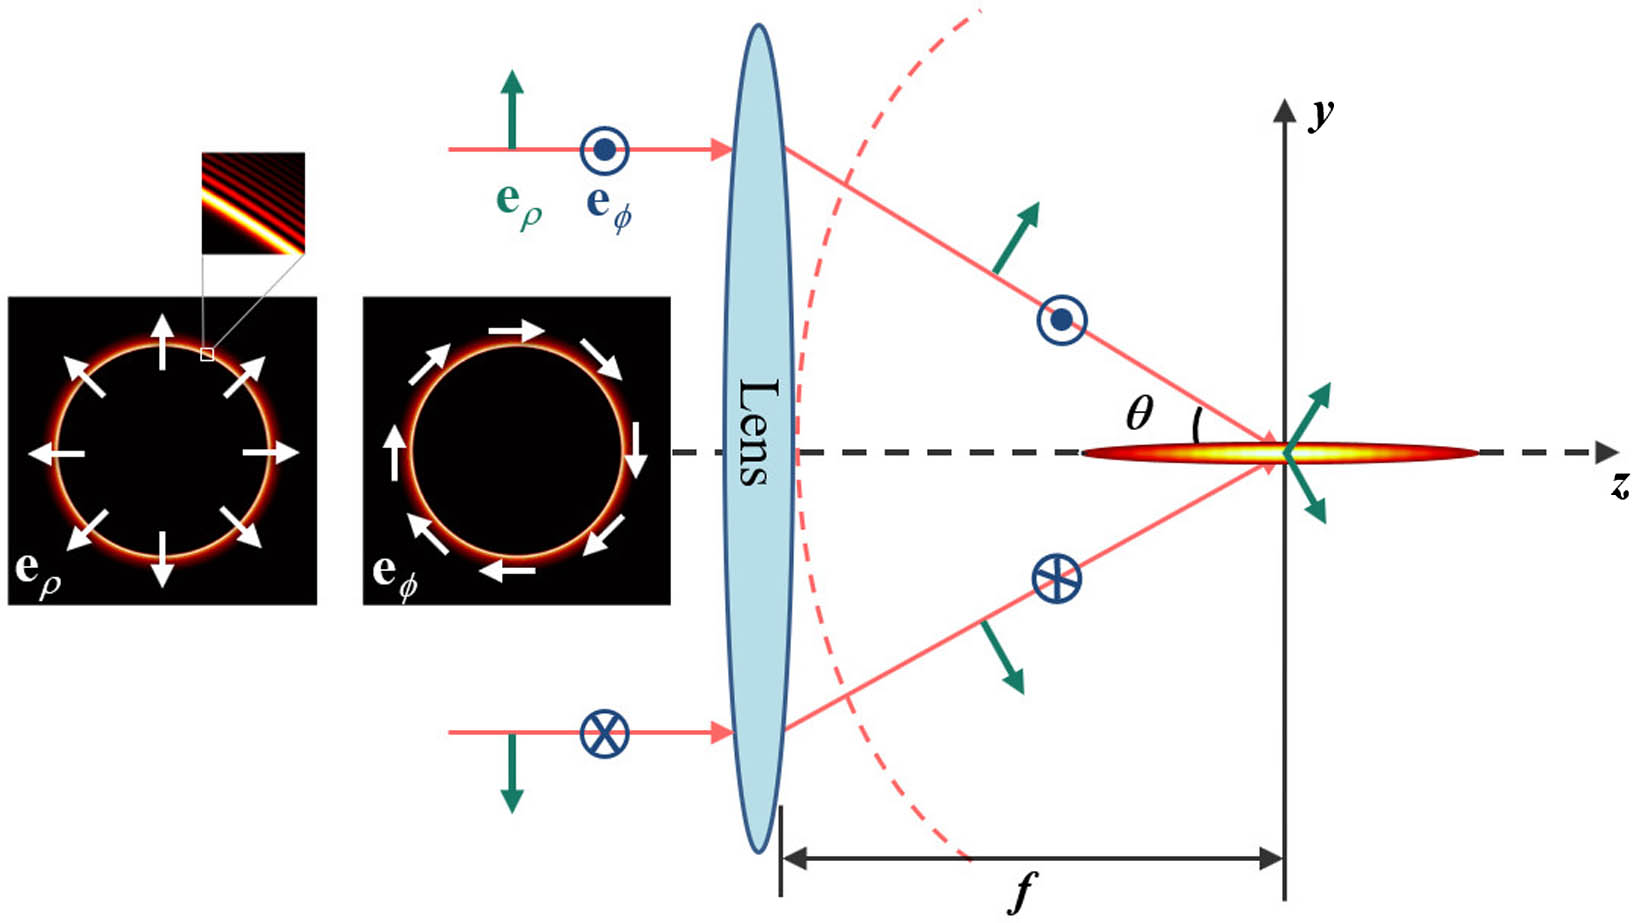 Schematic of the tight focusing of the CPBB, where the insets denote the amplitude and the polarization profiles of the input beam, the green and blue markers denote the radial (eρ) and azimuthal (eφ) polarizations, and θ denotes the angle between the focused ray and the z-axis.